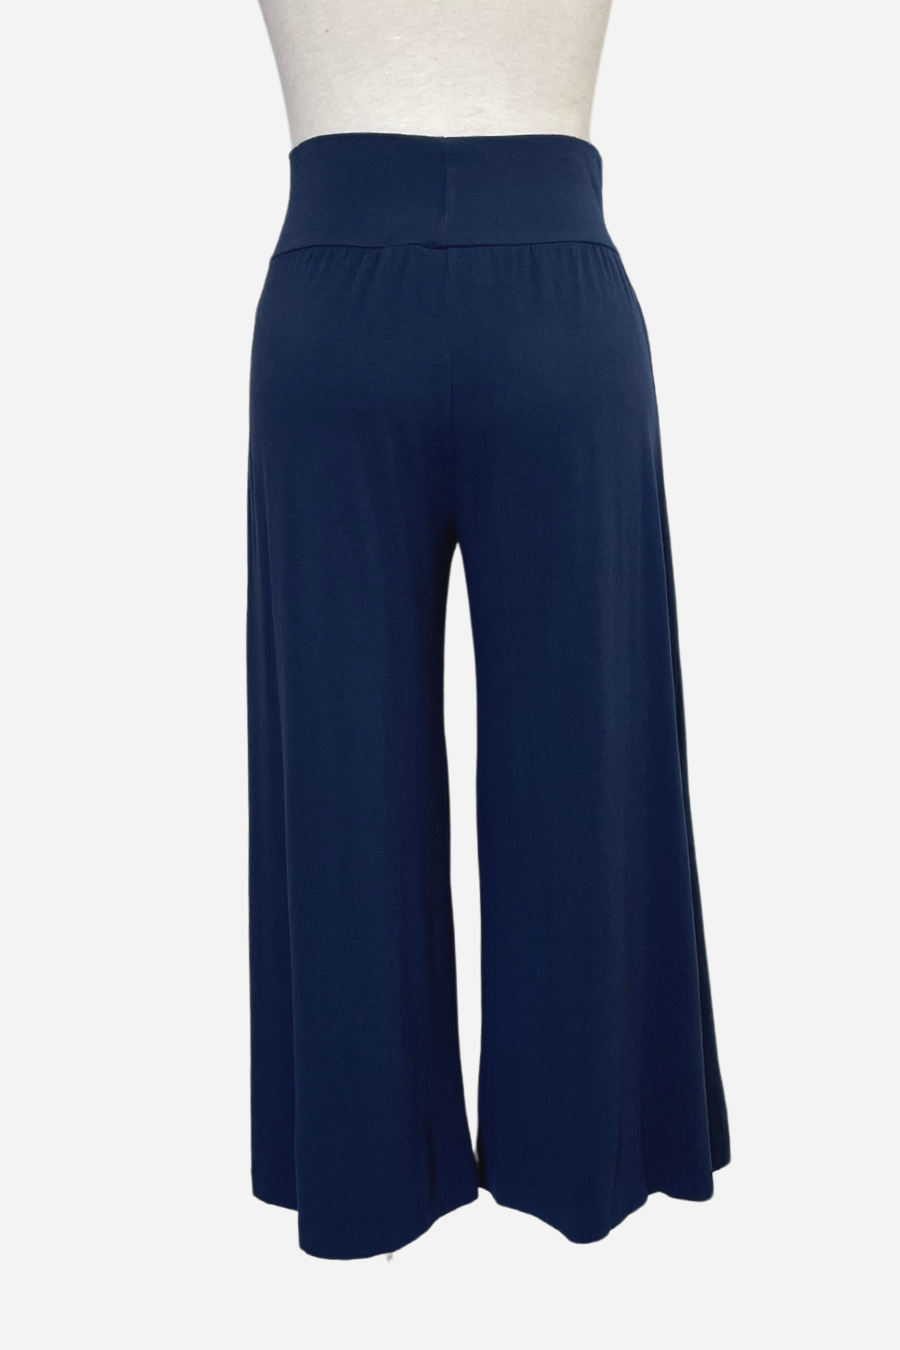 Ella Pant in Navy Bamboo/Cotton